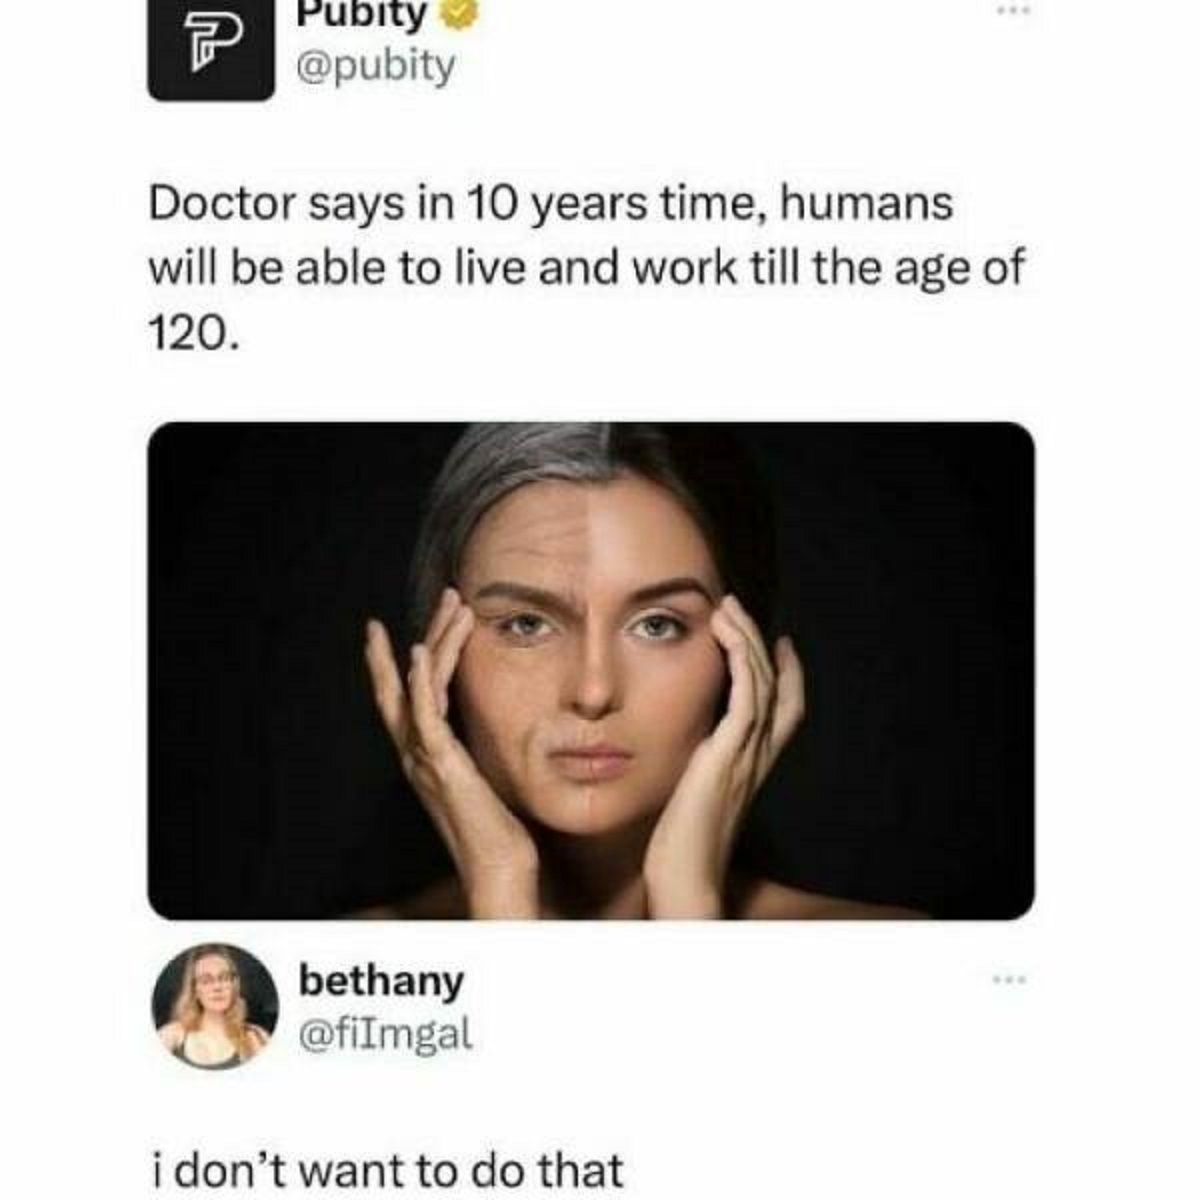 media - Pubity P Doctor says in 10 years time, humans will be able to live and work till the age of 120. bethany i don't want to do that i